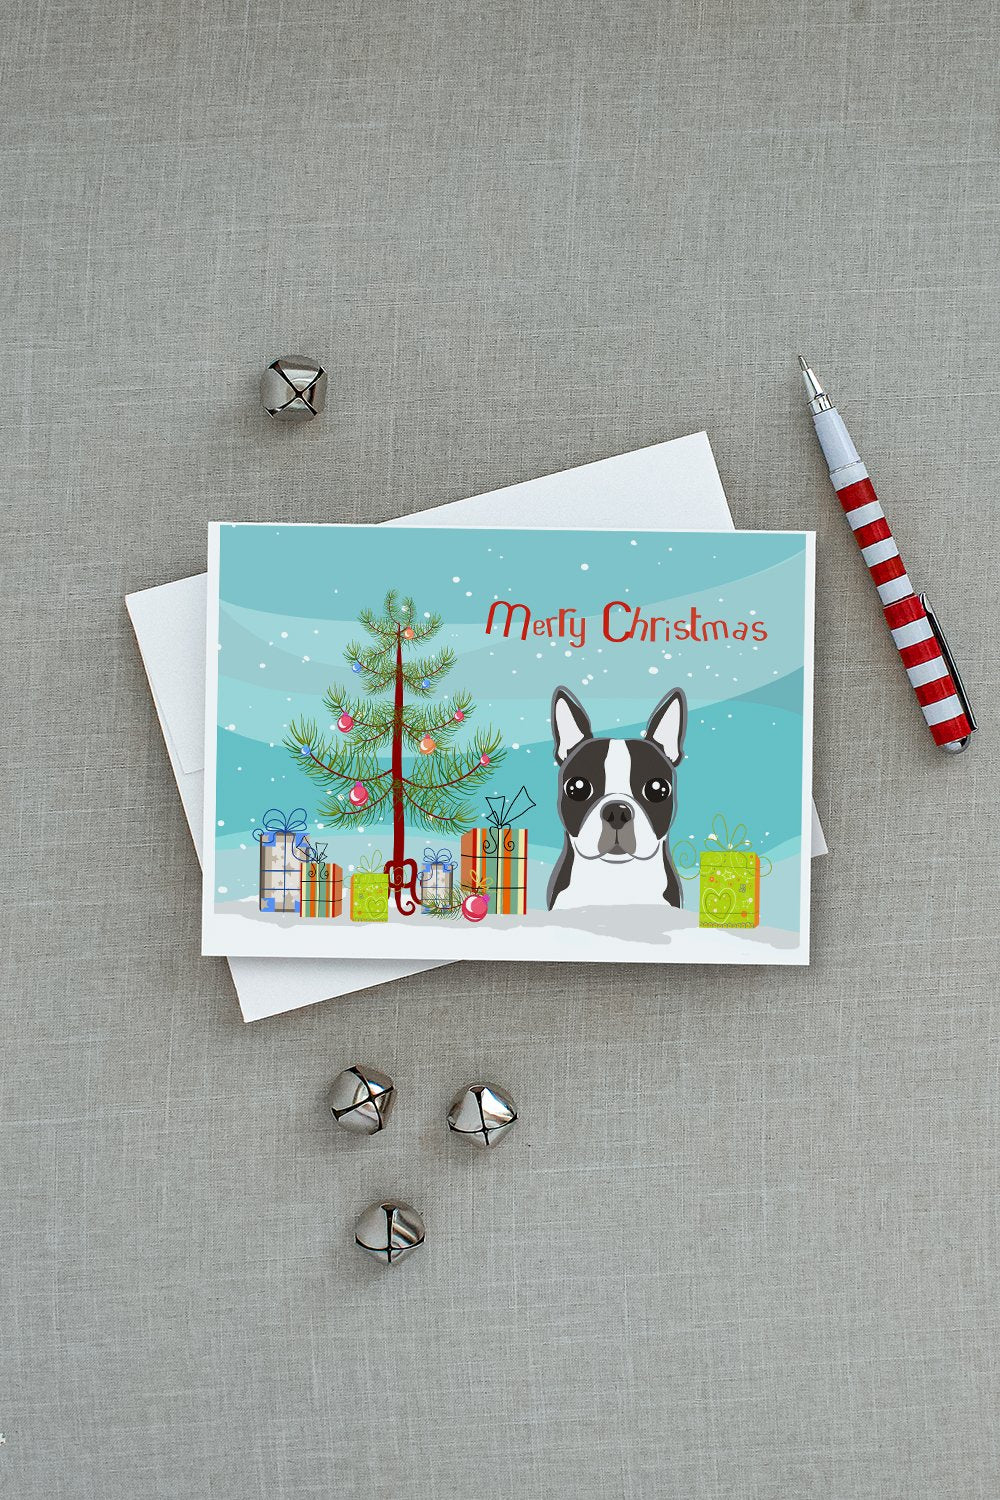 Christmas Tree and Boston Terrier Greeting Cards and Envelopes Pack of 8 - the-store.com